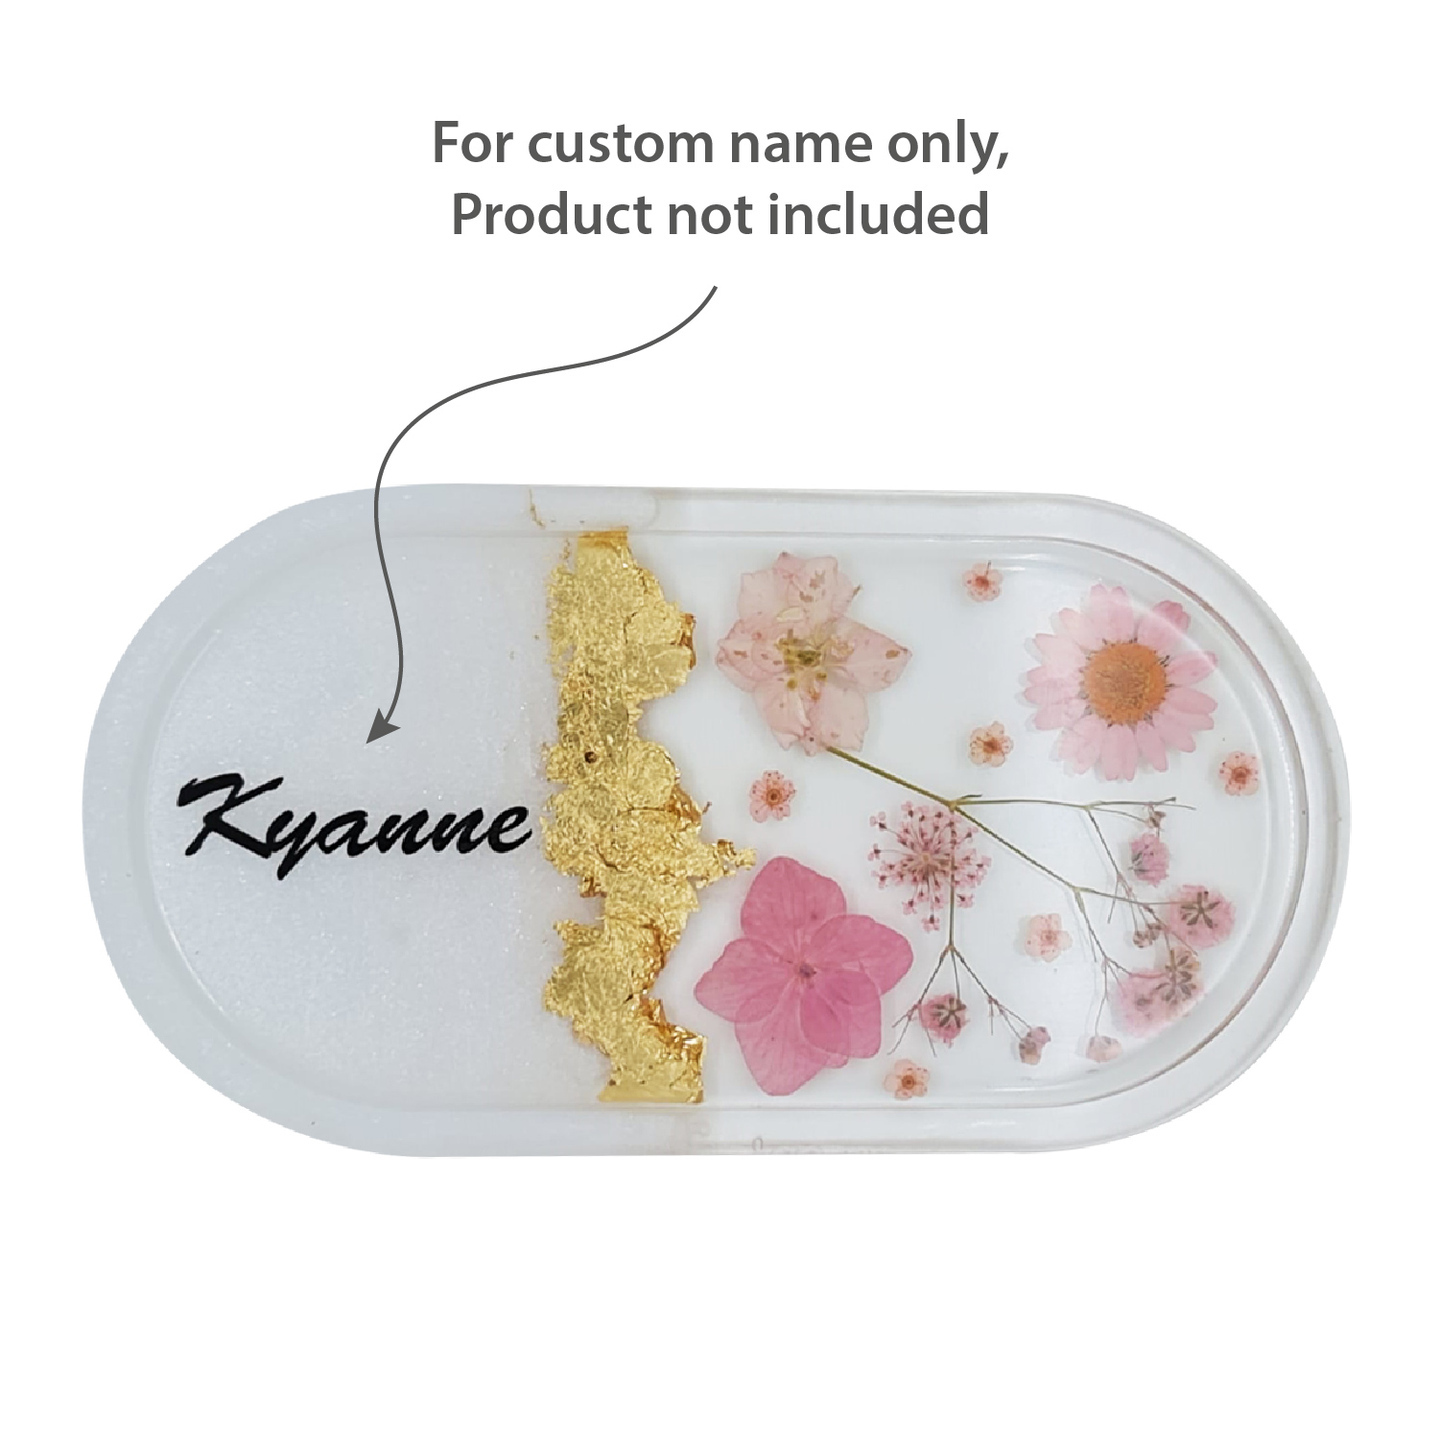 Customised Name- add on to any product  For Add-on ONLY